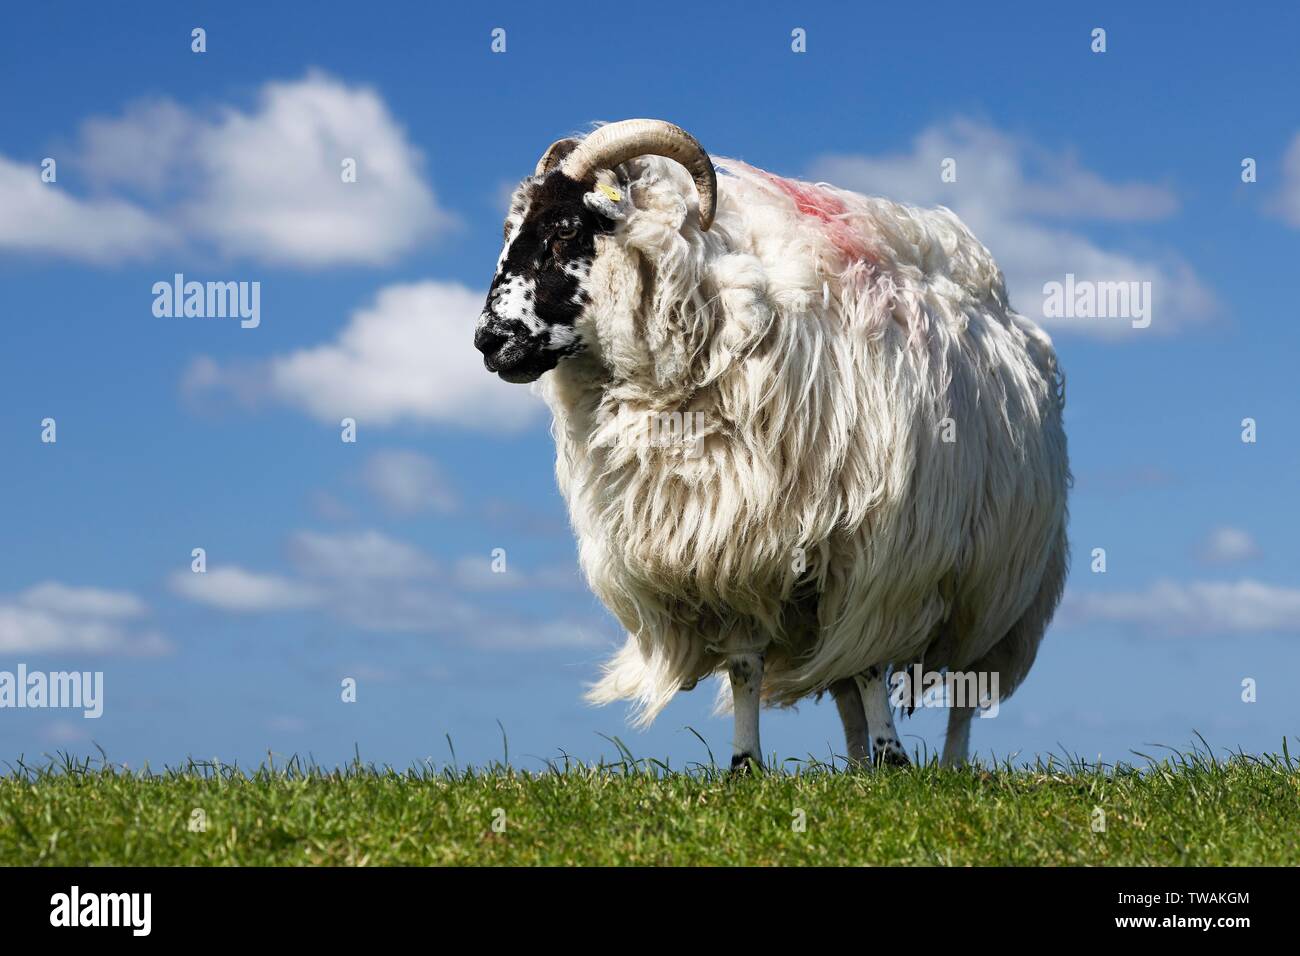 Domestic long-haired ram (Ovis gmelini aries) stands on dike against blue cloudy sky, Schleswig-Holstein, Germany Stock Photo